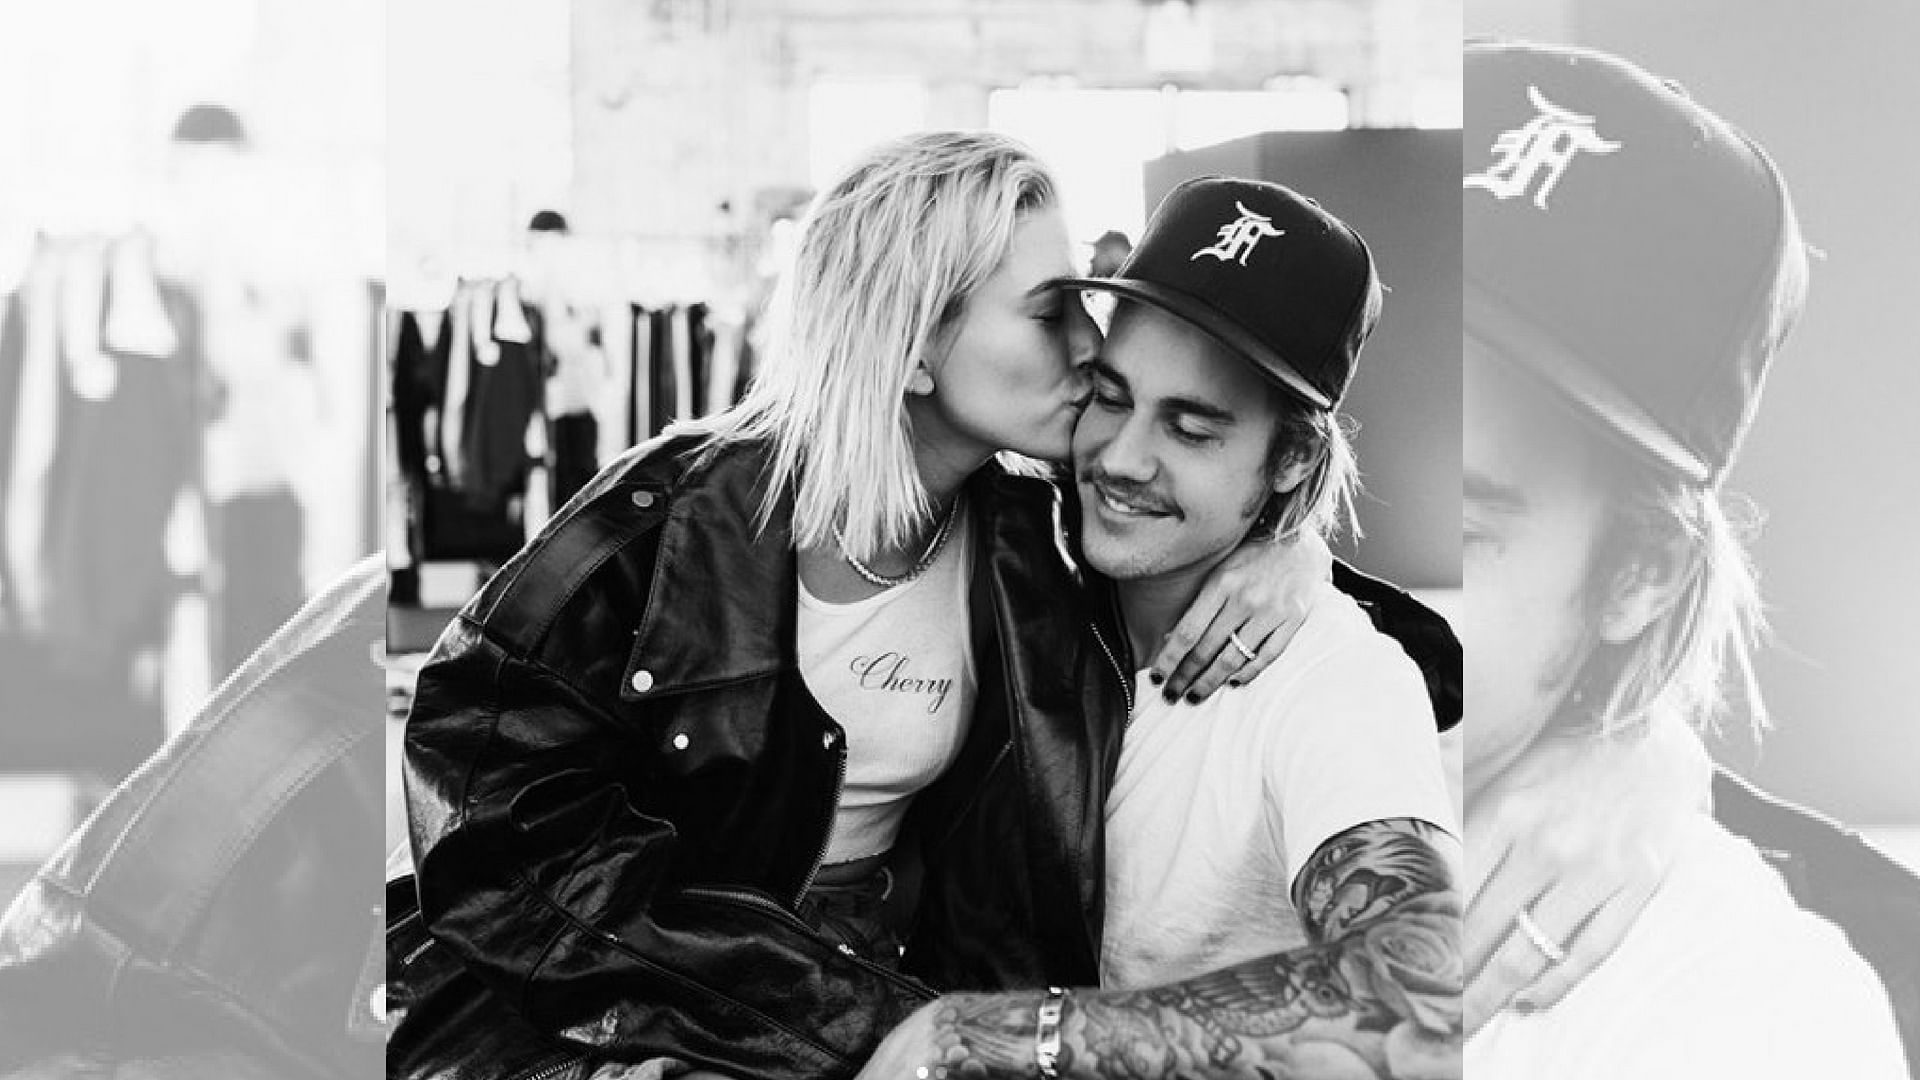 Hailey Baldwin and Justin Bieber are engaged.